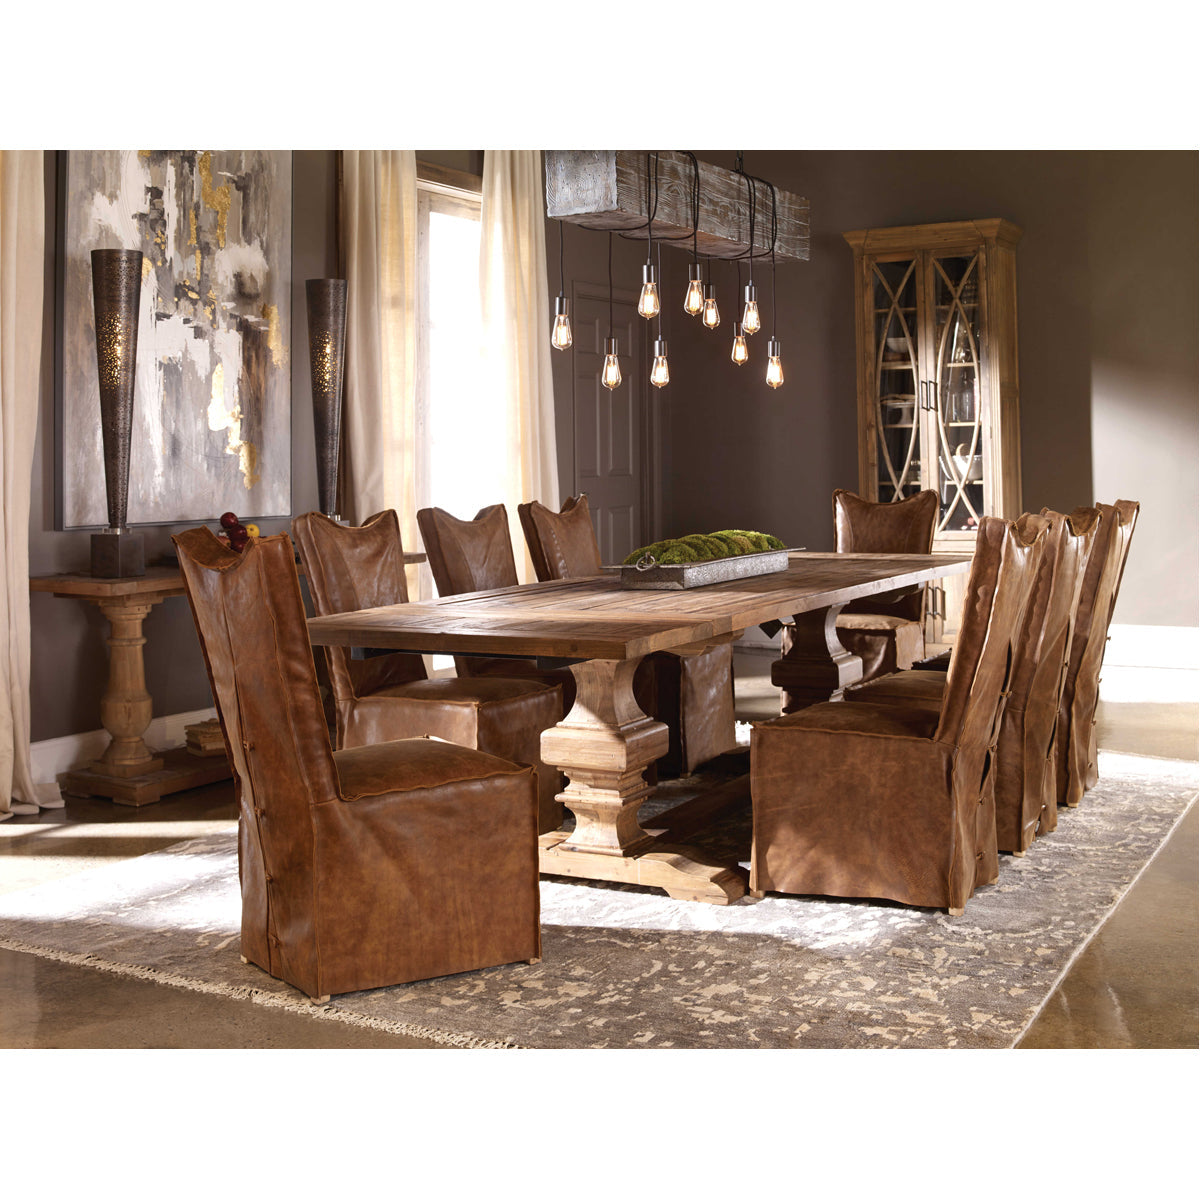 Uttermost Delroy Armless Chairs, Set of 2